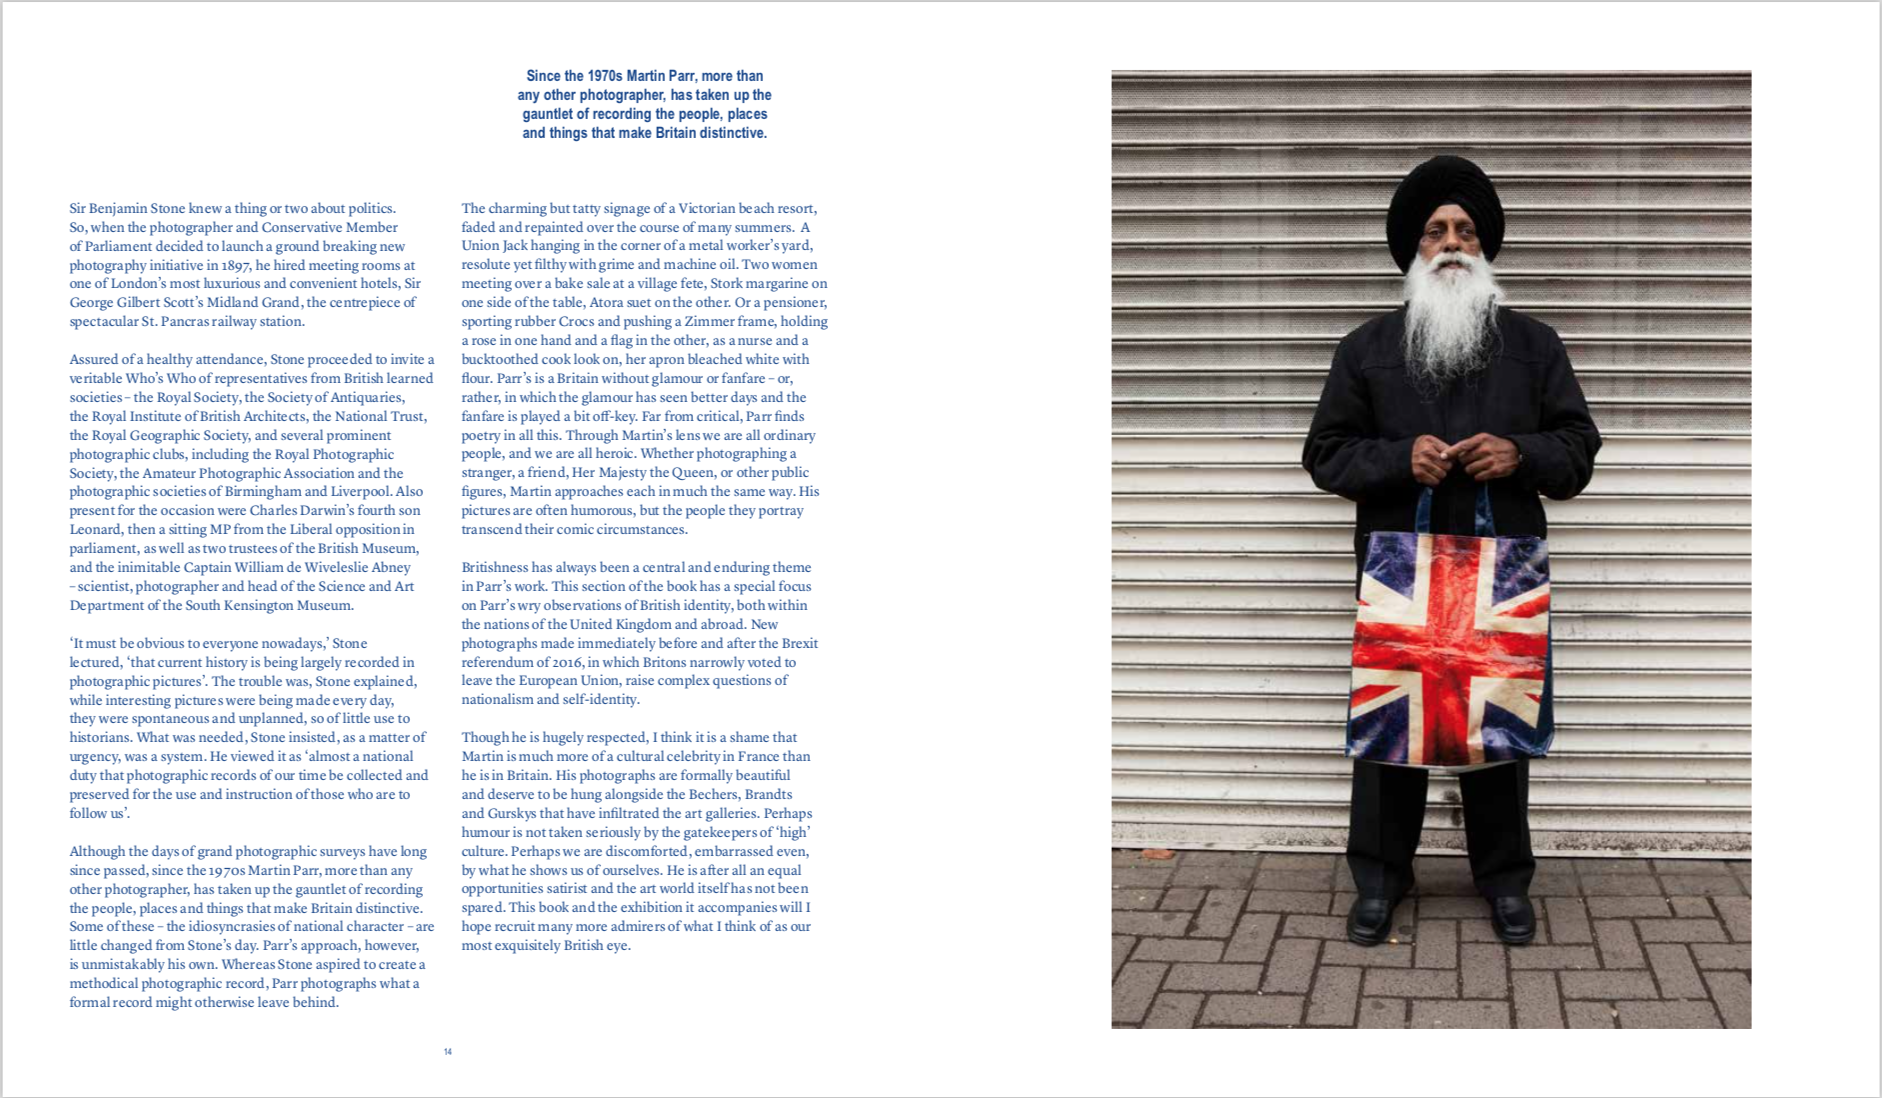 By Phillip Prodger, Martin Perry from Only Human: Photographs by Martin Parr copyright Phaidon 2019